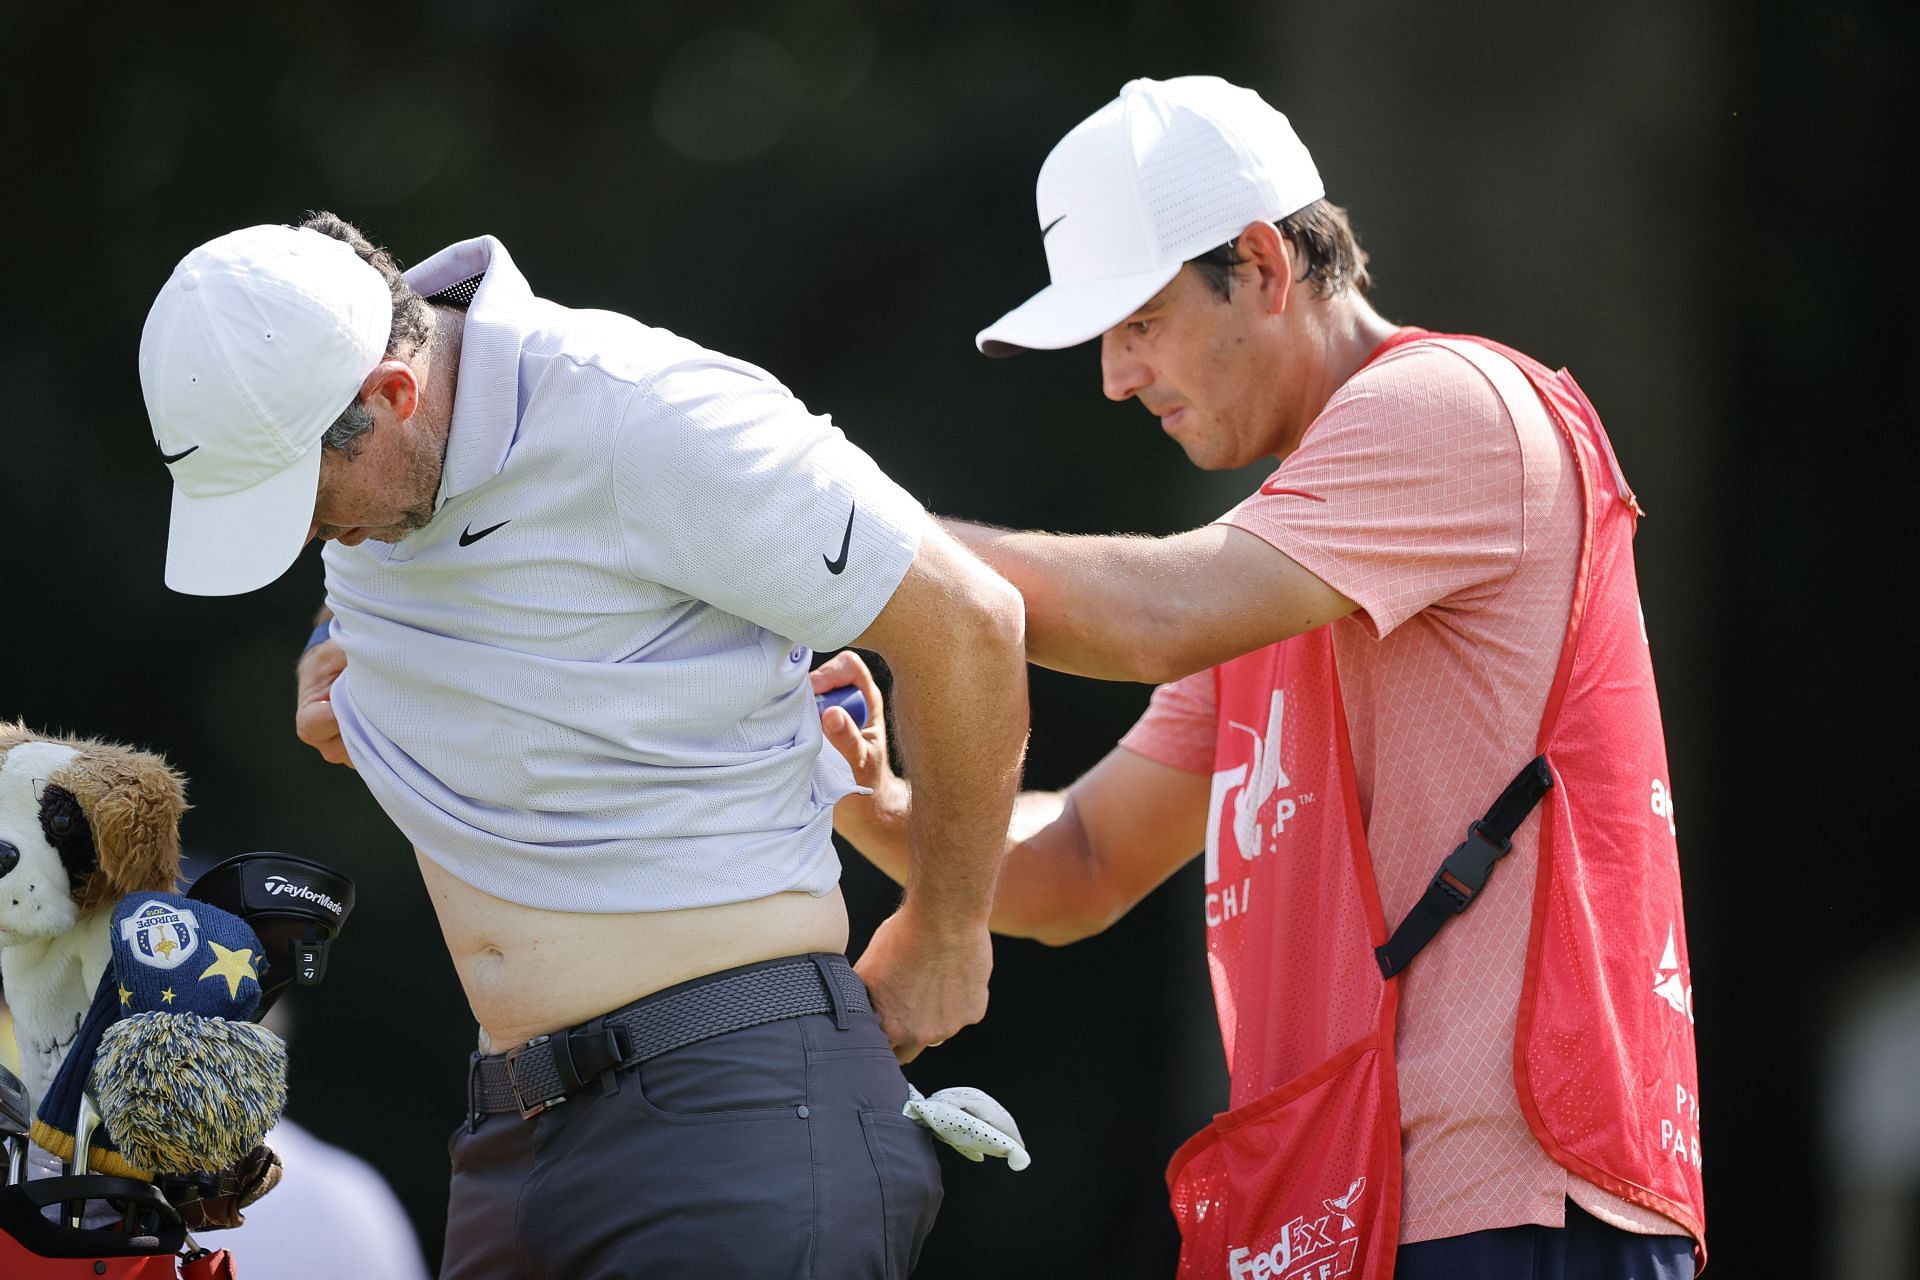 Rory McIlroy treating his lower back pain right at the course of the 2023 Tour Championship (Image via Getty).